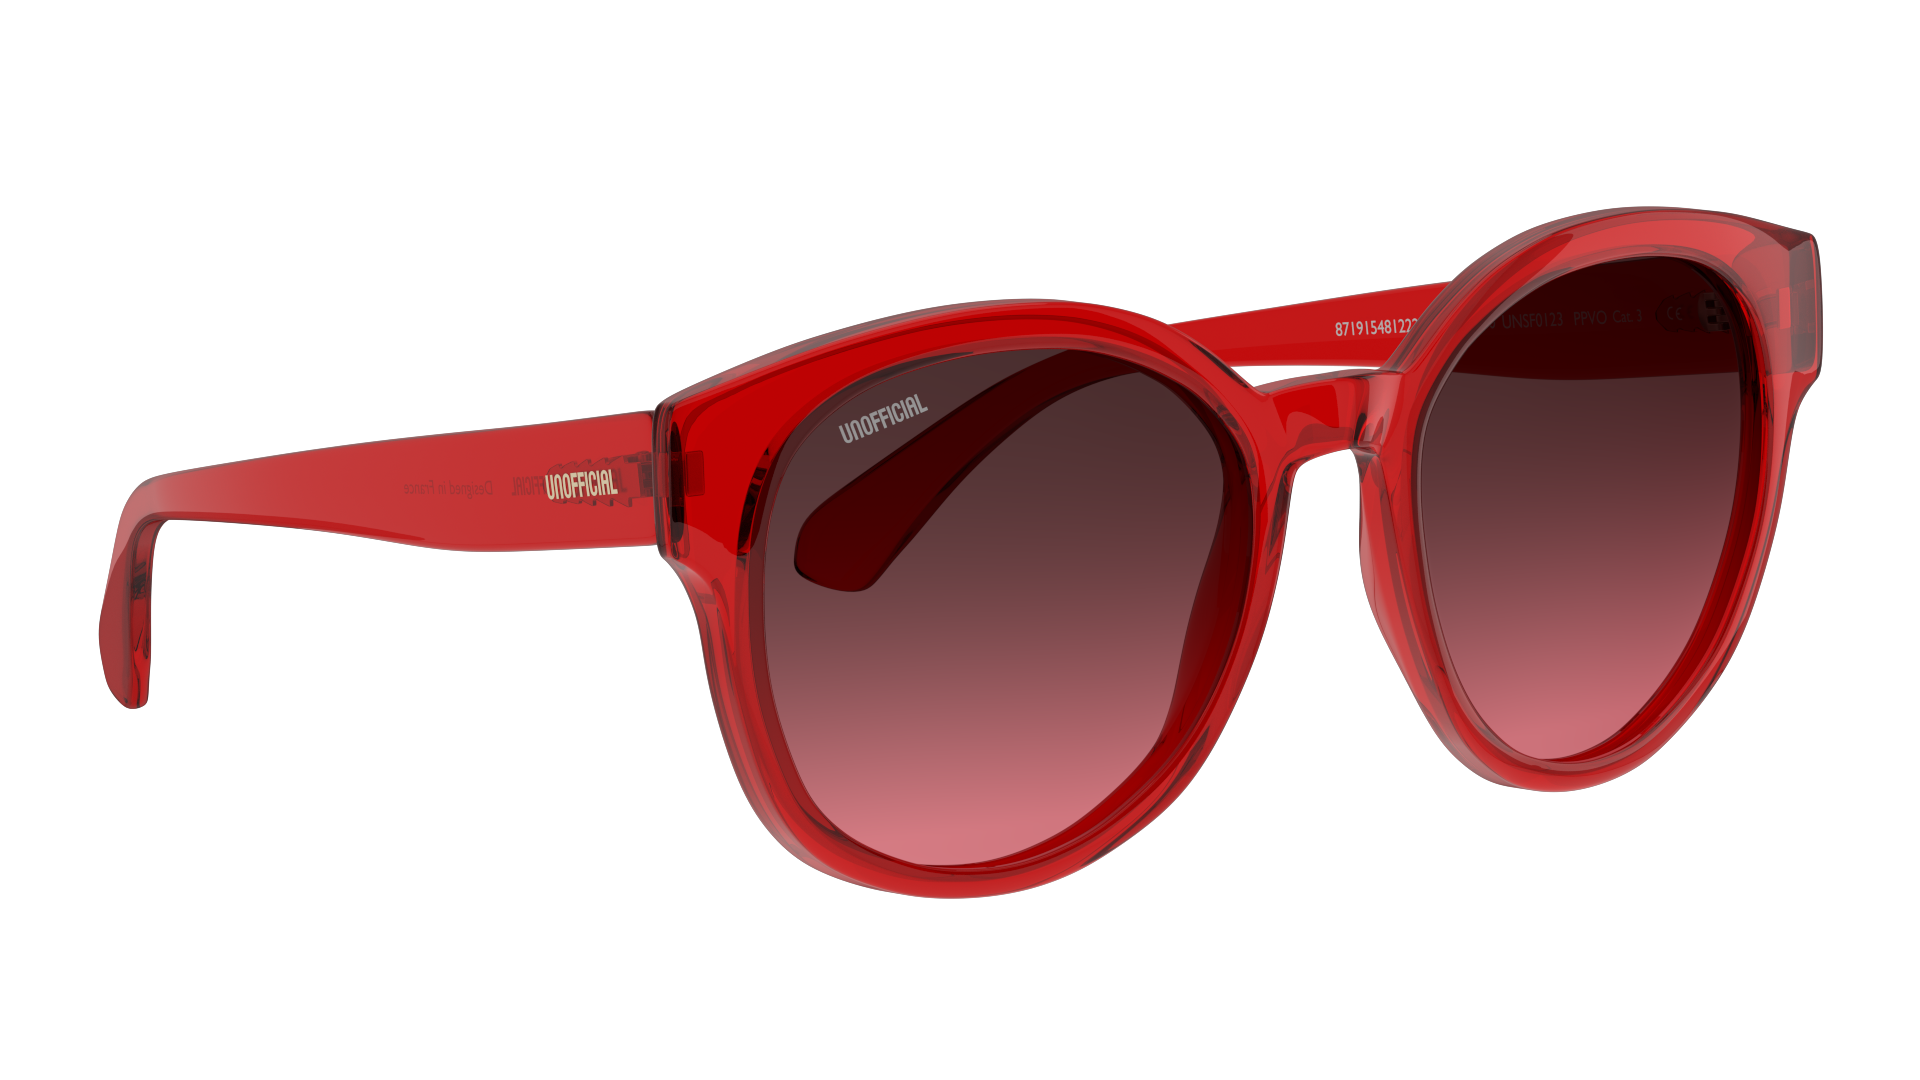 Angle_Right01 Unofficial UNSF0123 (PPV0) Sunglasses Violet / Transparent, Red